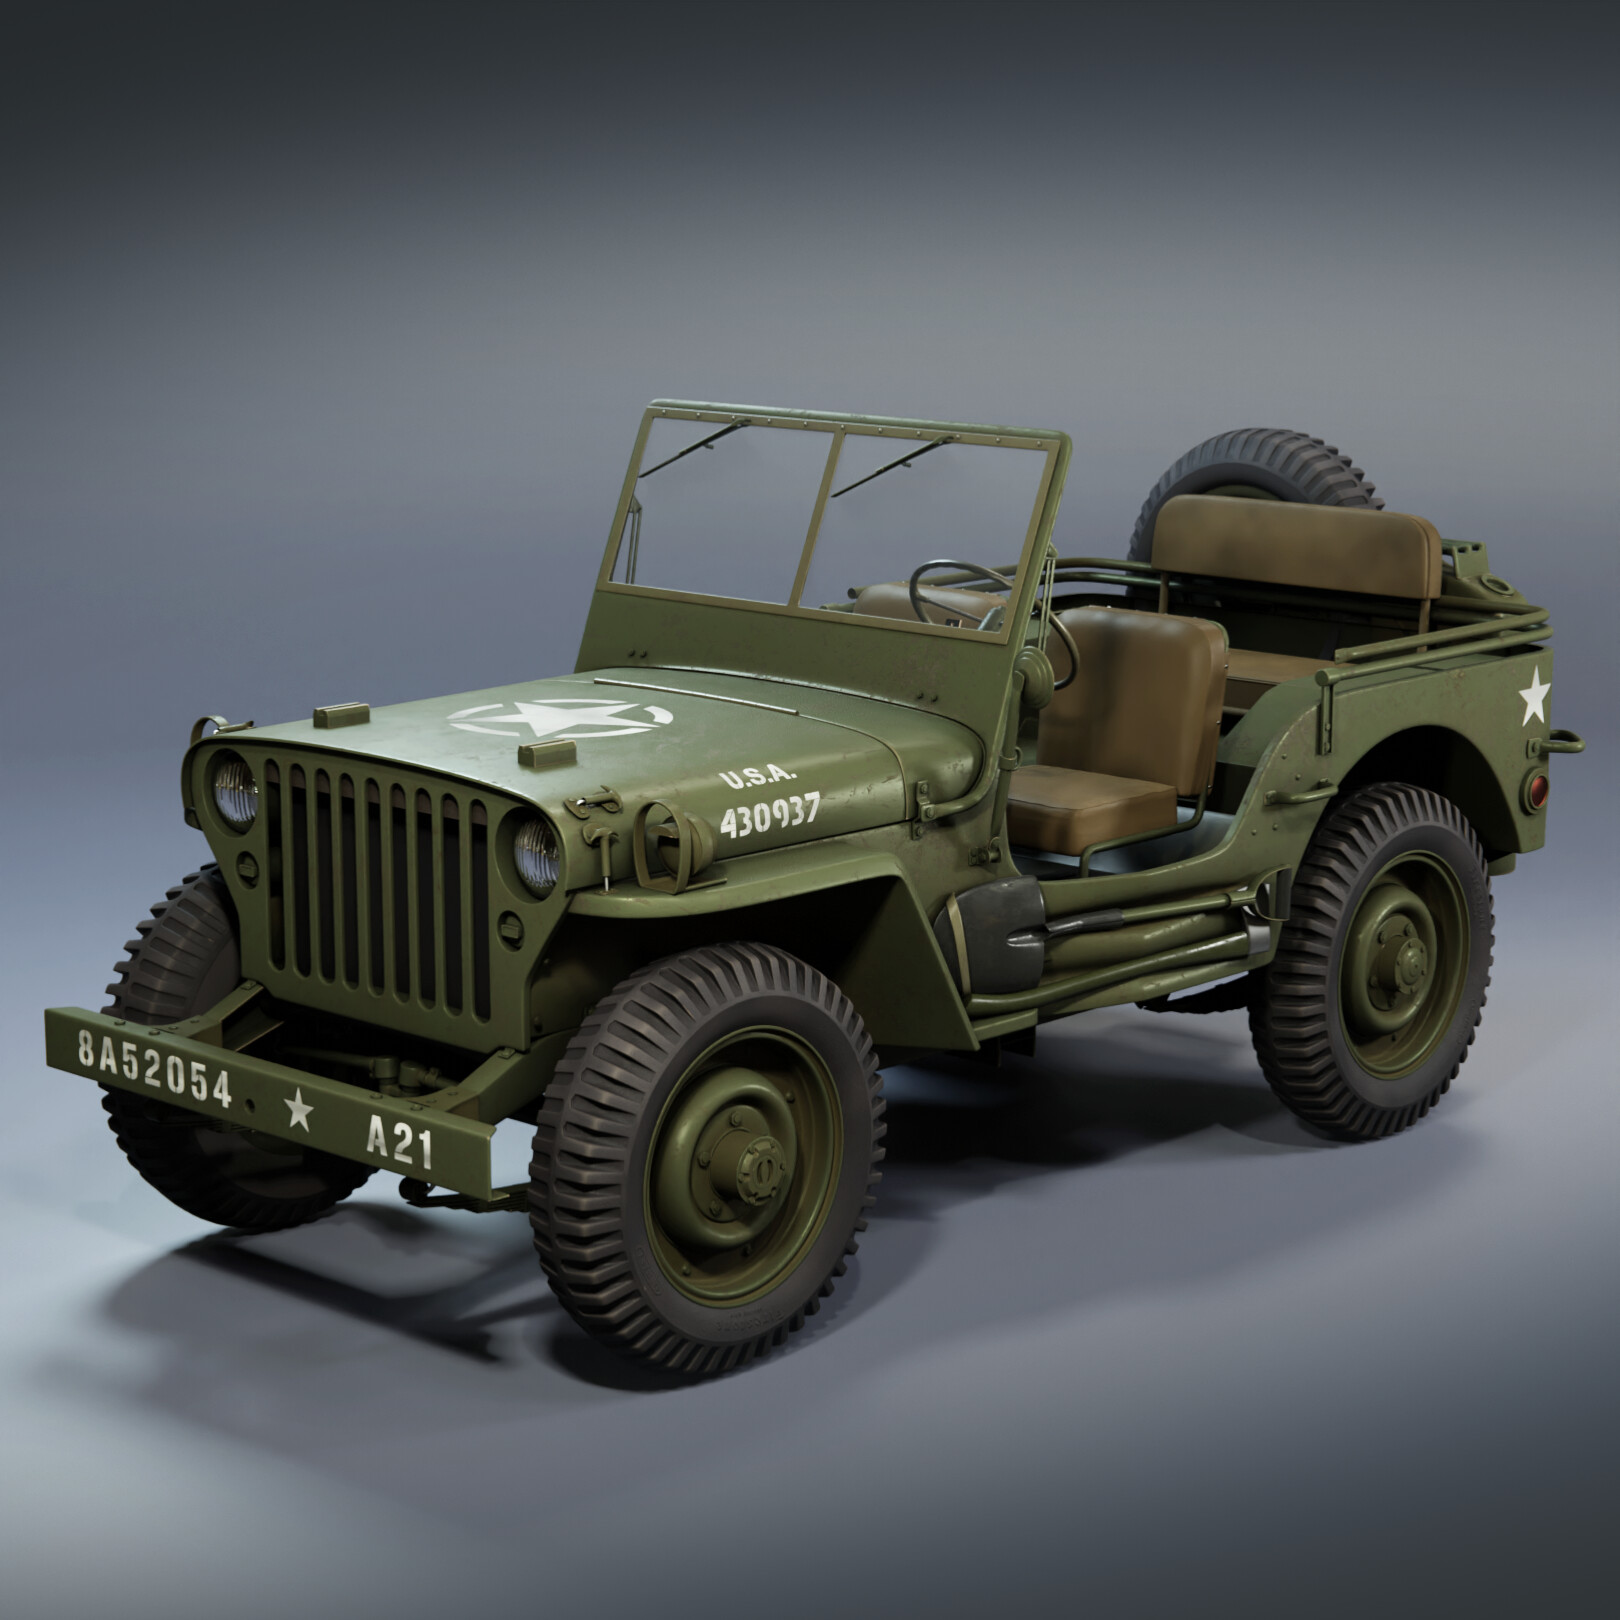 Jeep Willys MB 1941-1945 - Finished Projects - Blender Artists Community